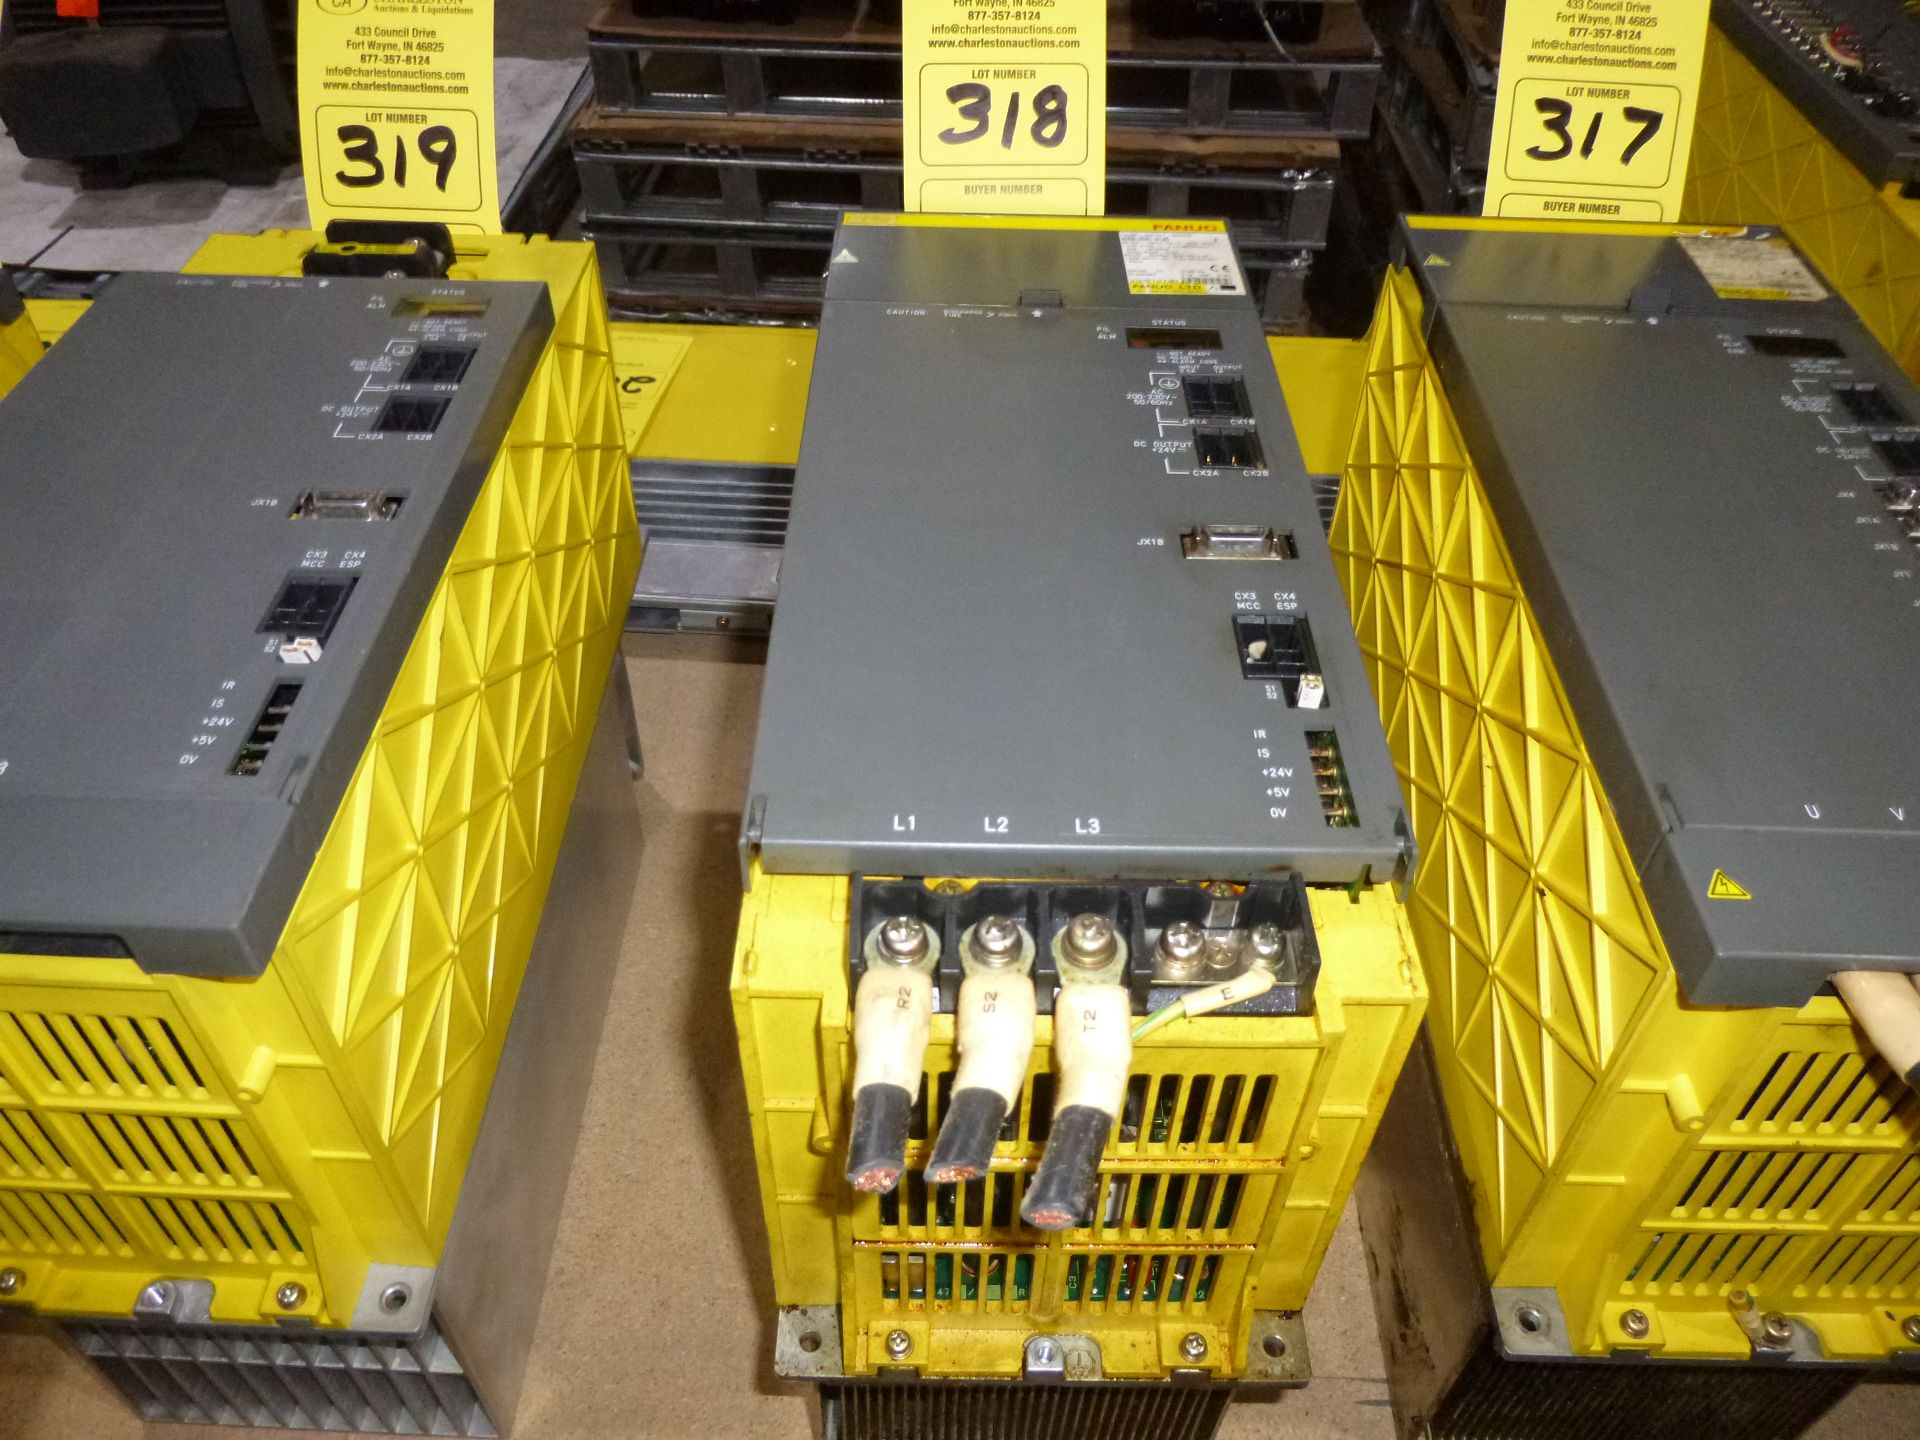 Fanuc power supply module model A06B-6091-H145, as always with Brolyn LLC auctions, all lots can